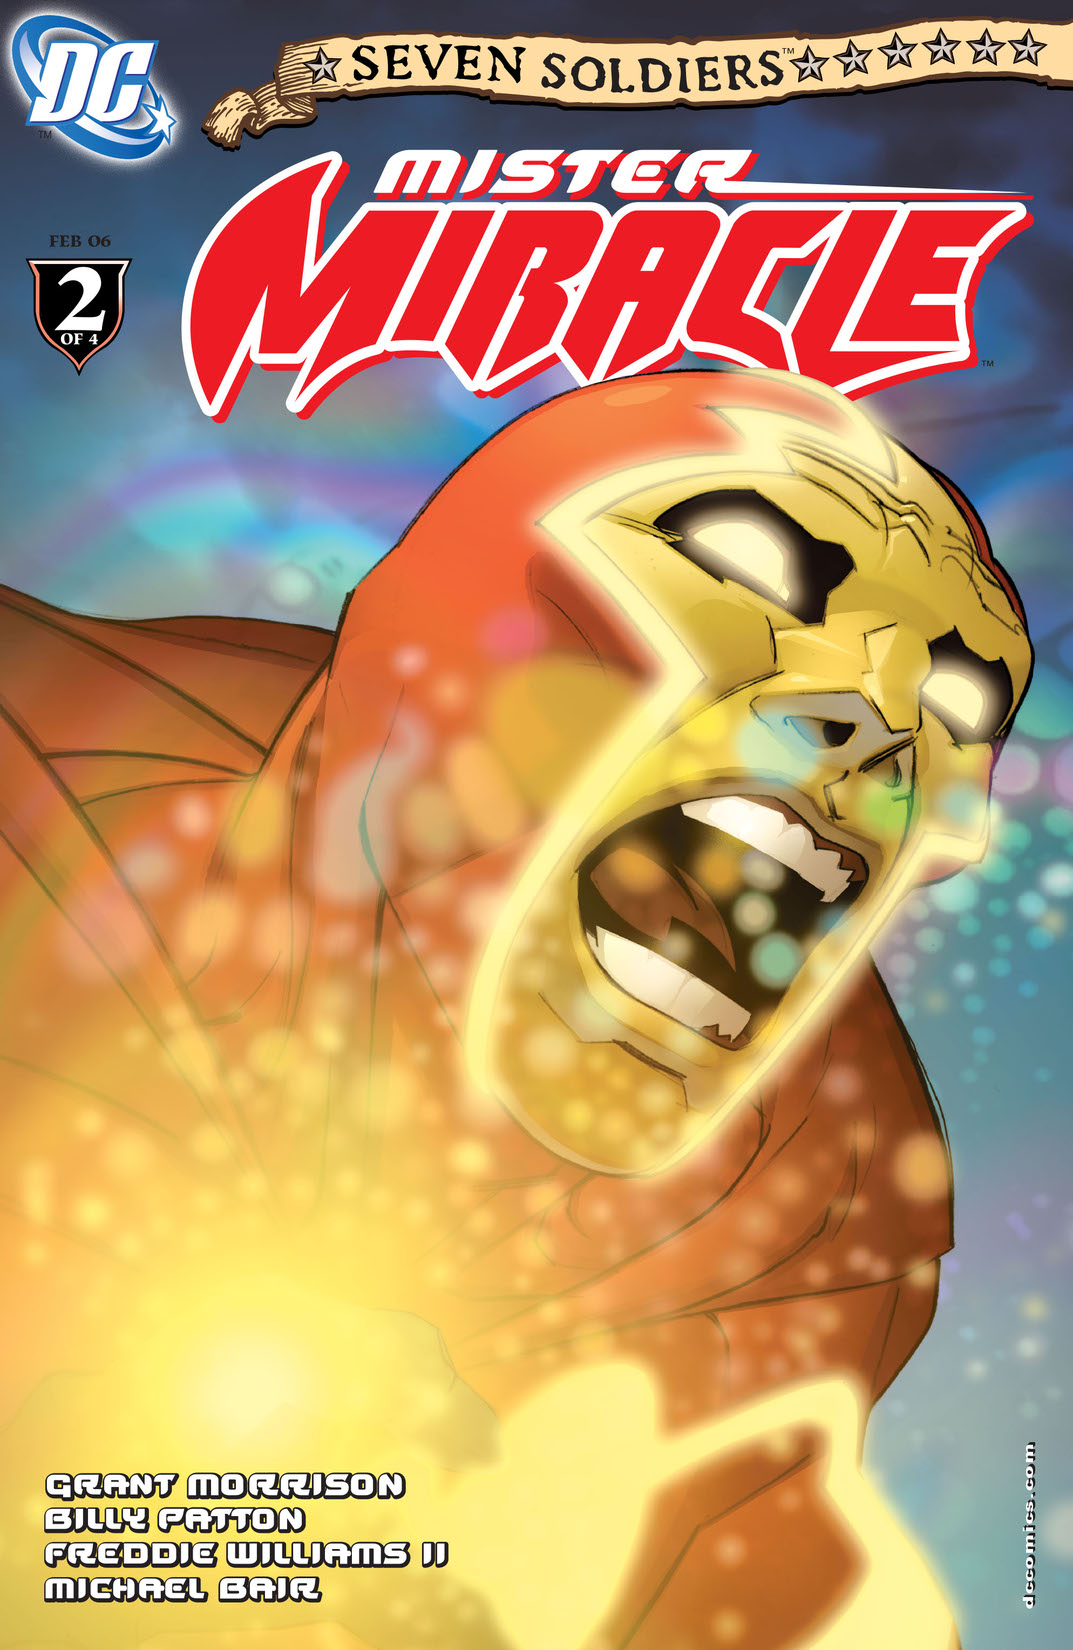 Seven Soldiers: Mister Miracle #2 preview images